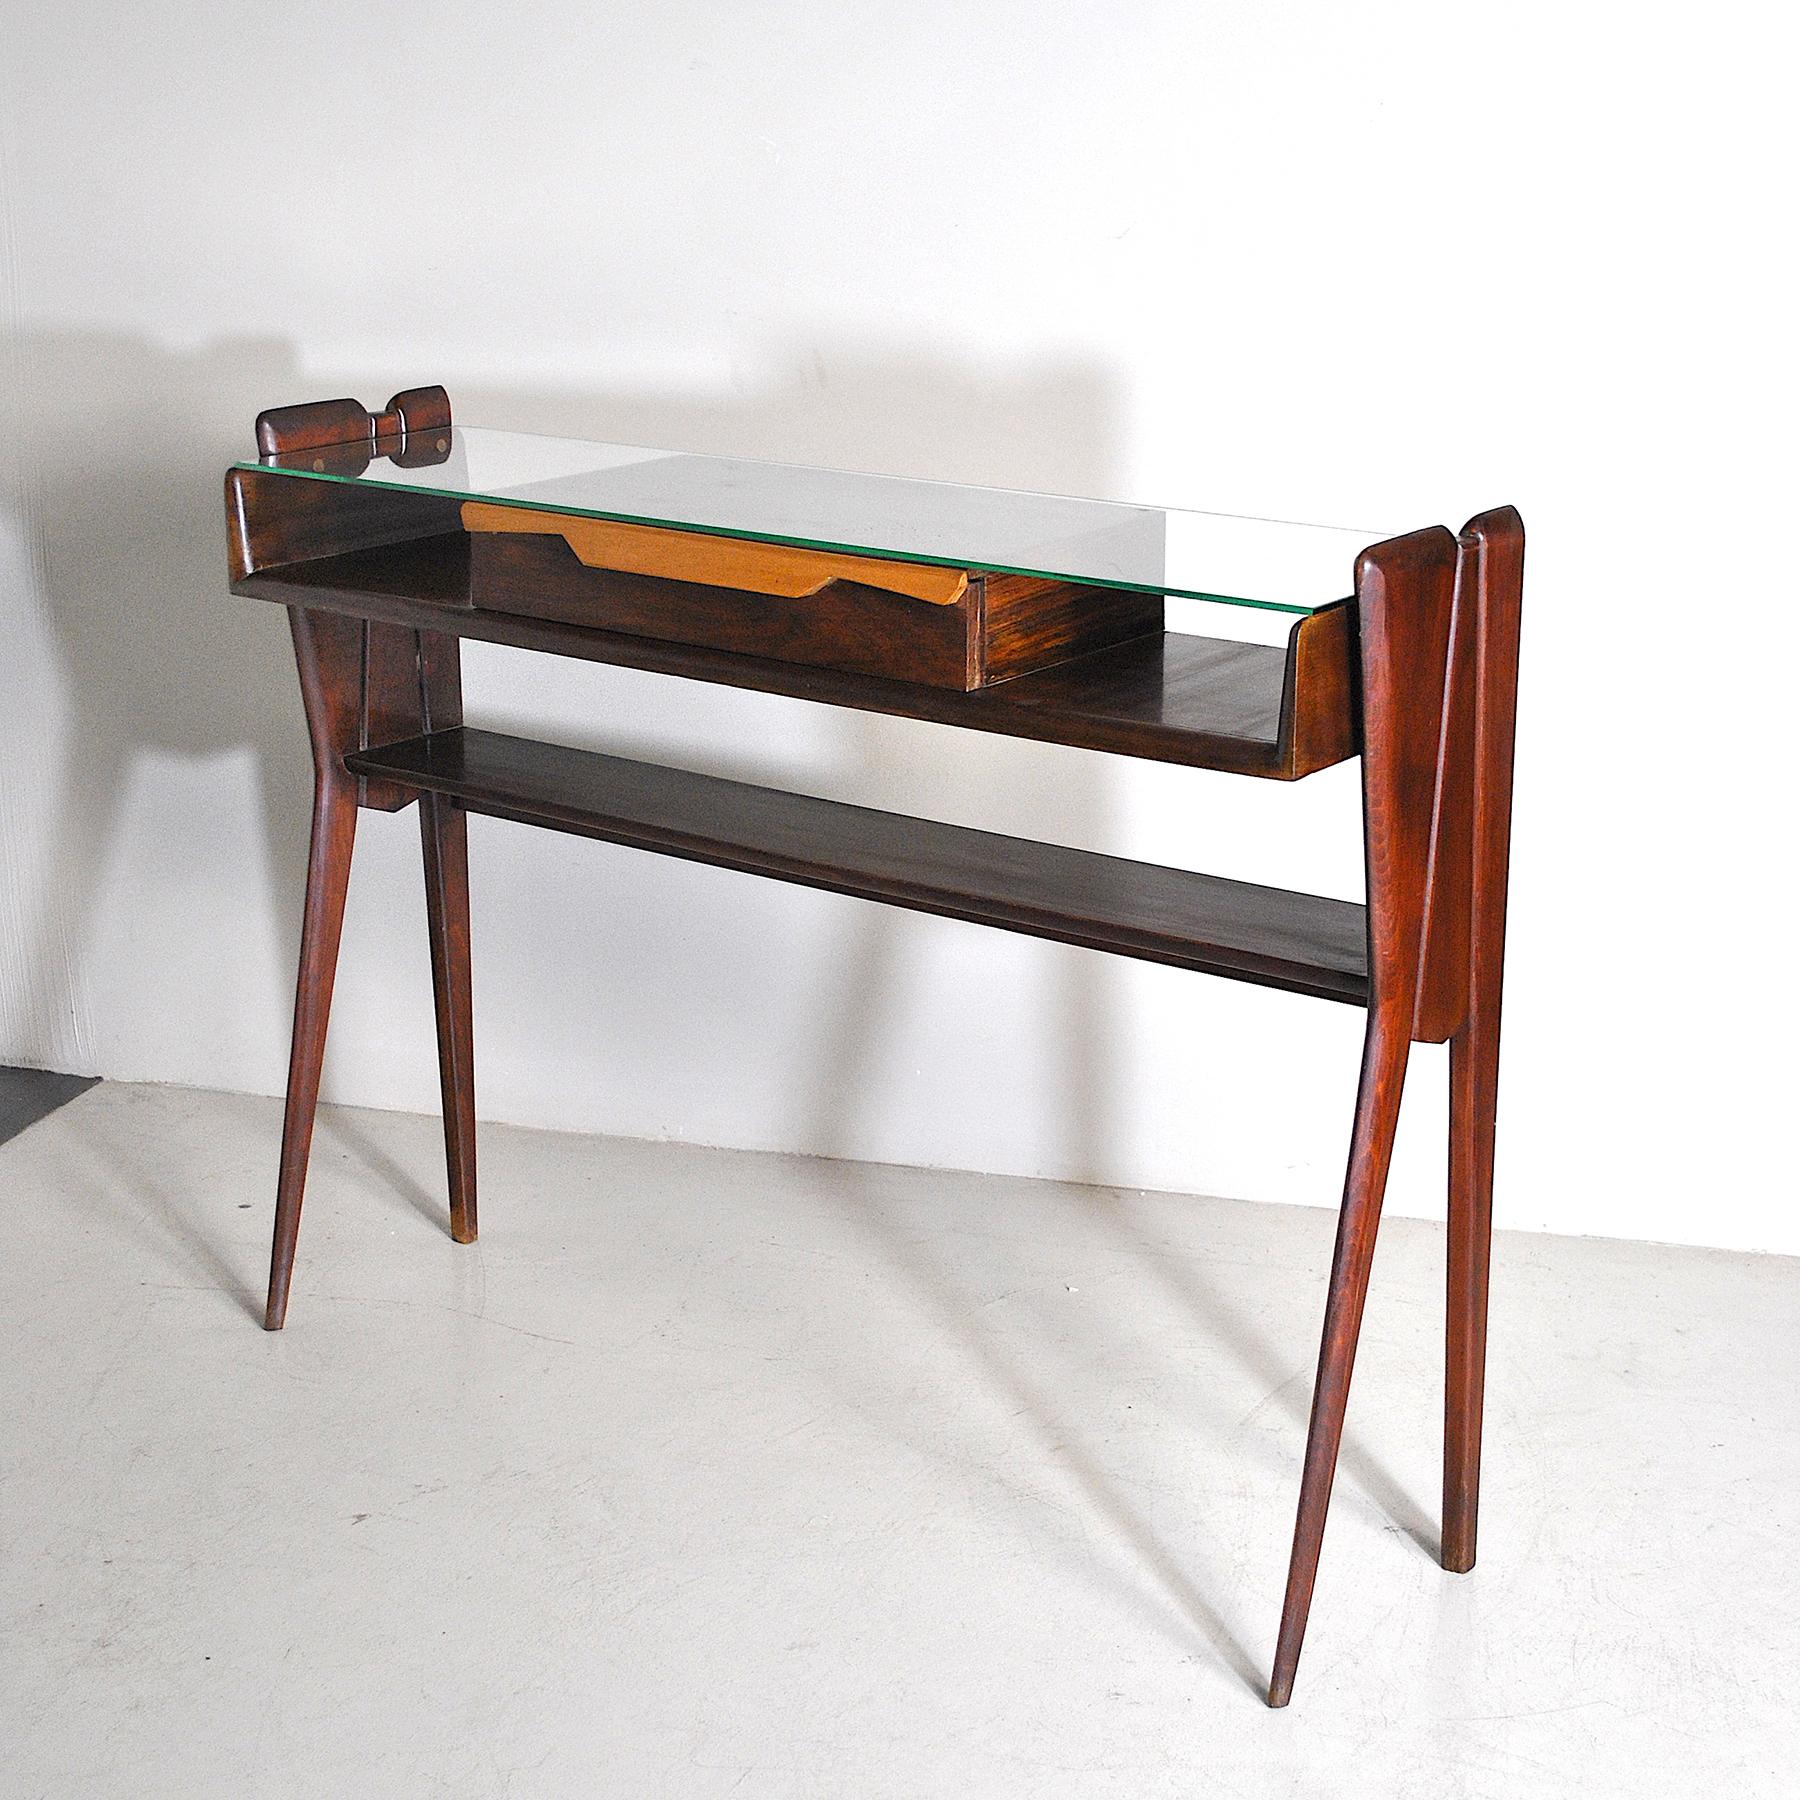 Italian Mid Century Console Table Late 50's Ico Parisi Style For Sale 1